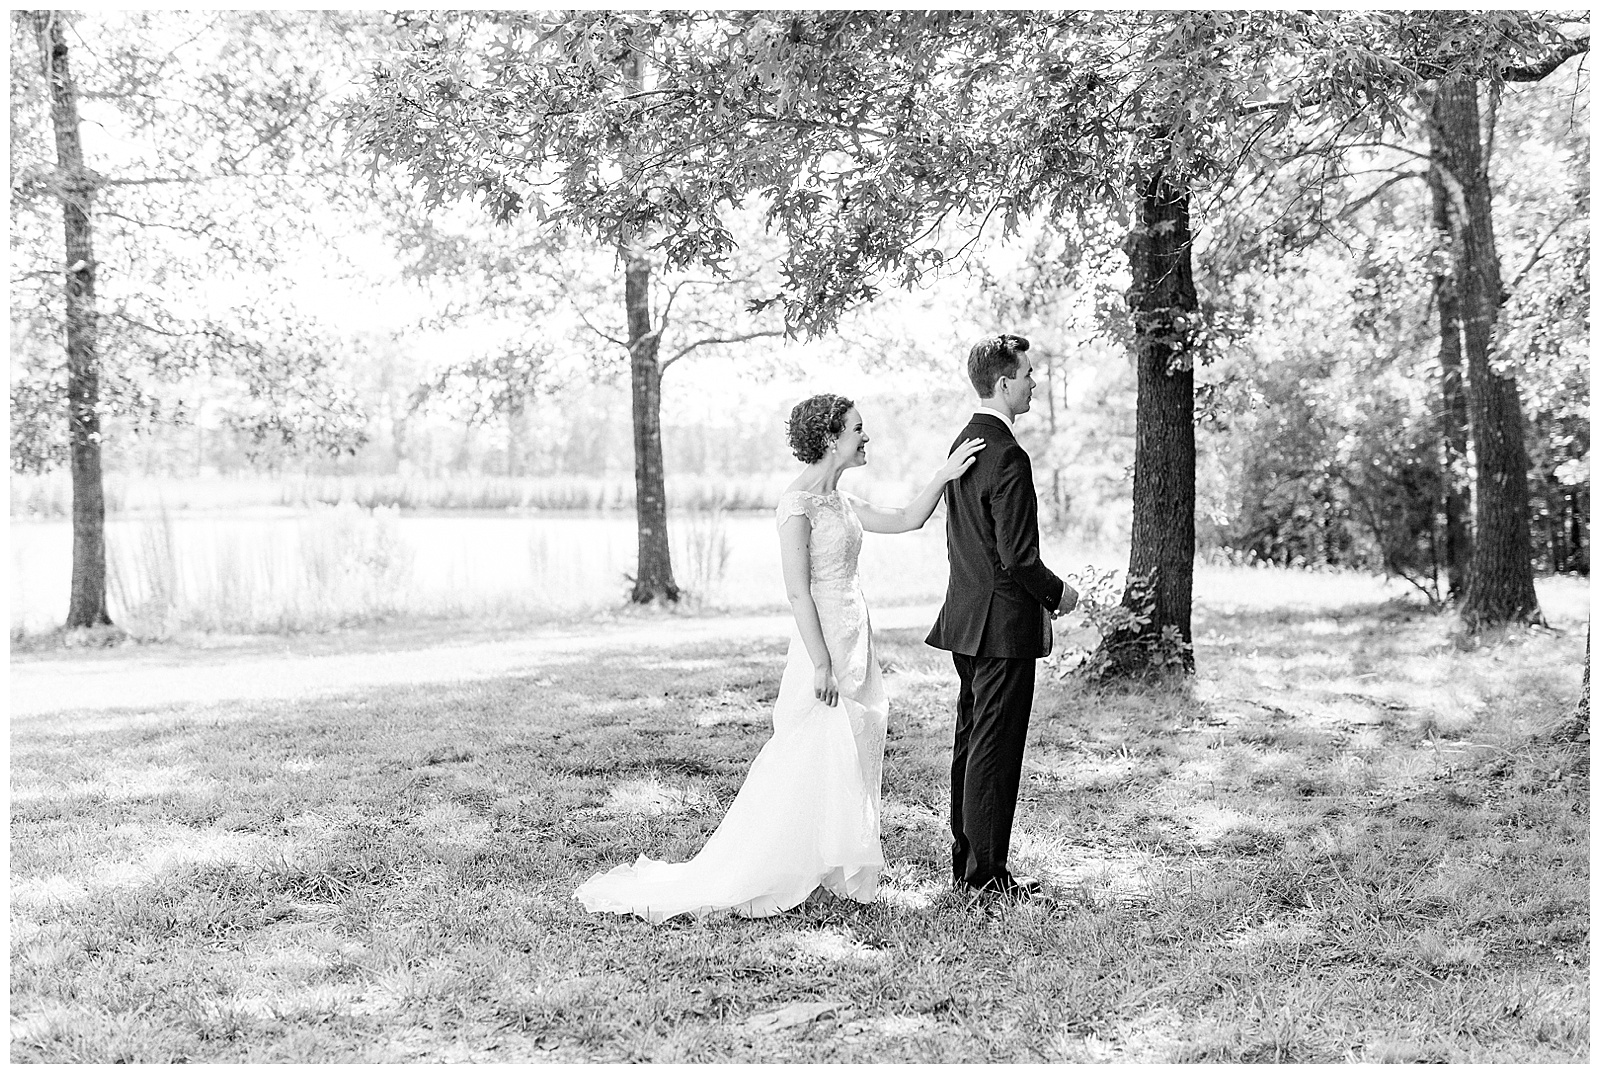 outside groomsmen first look of curly short haired bride with lace wedding dress